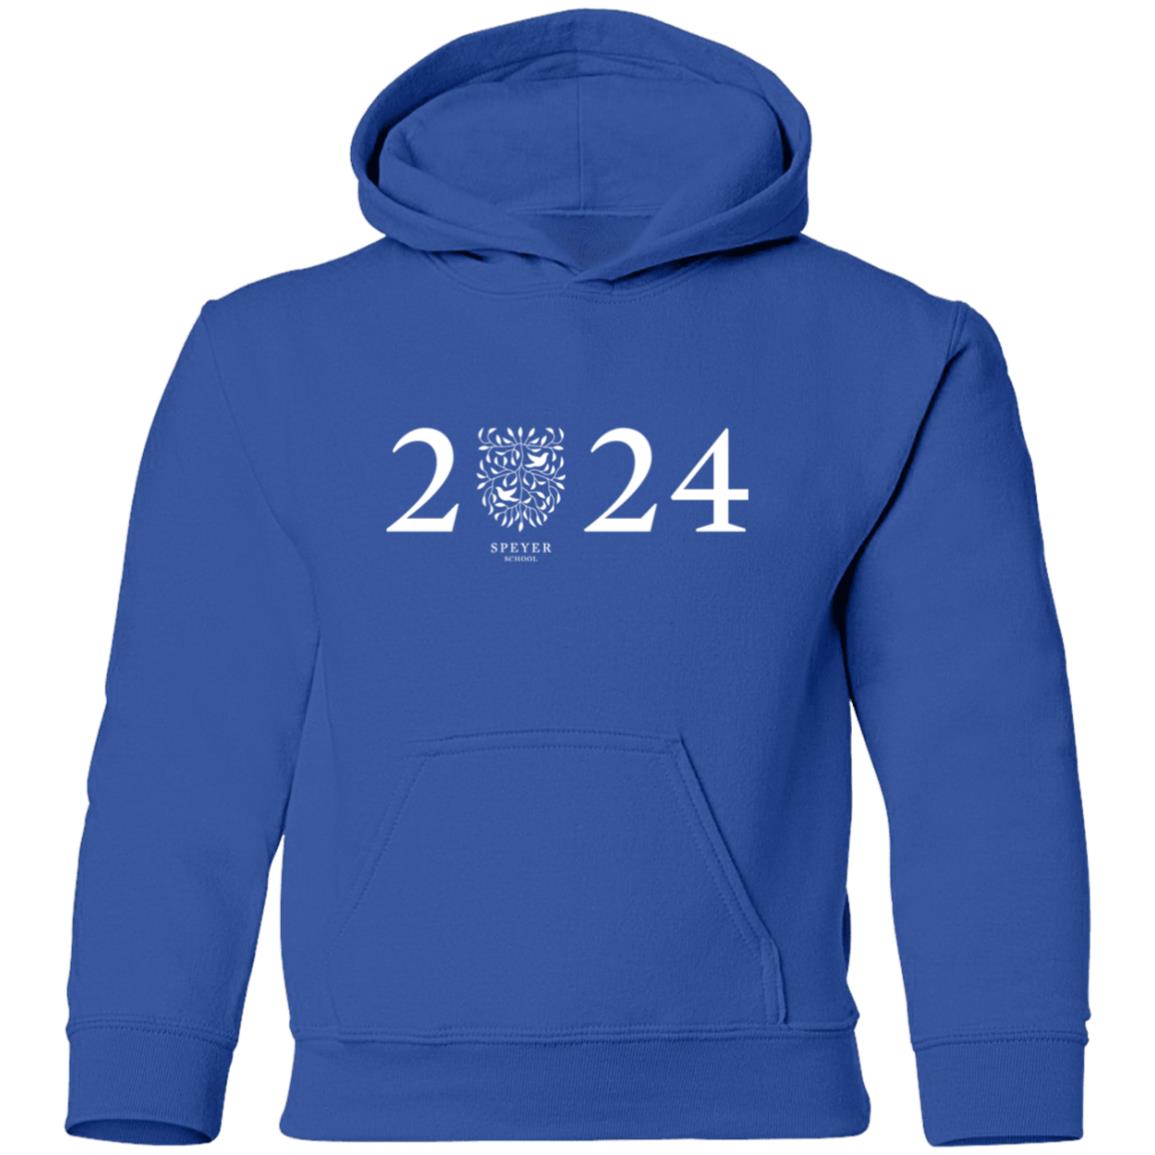 Graduating Class Hoodie, Youth Sizes